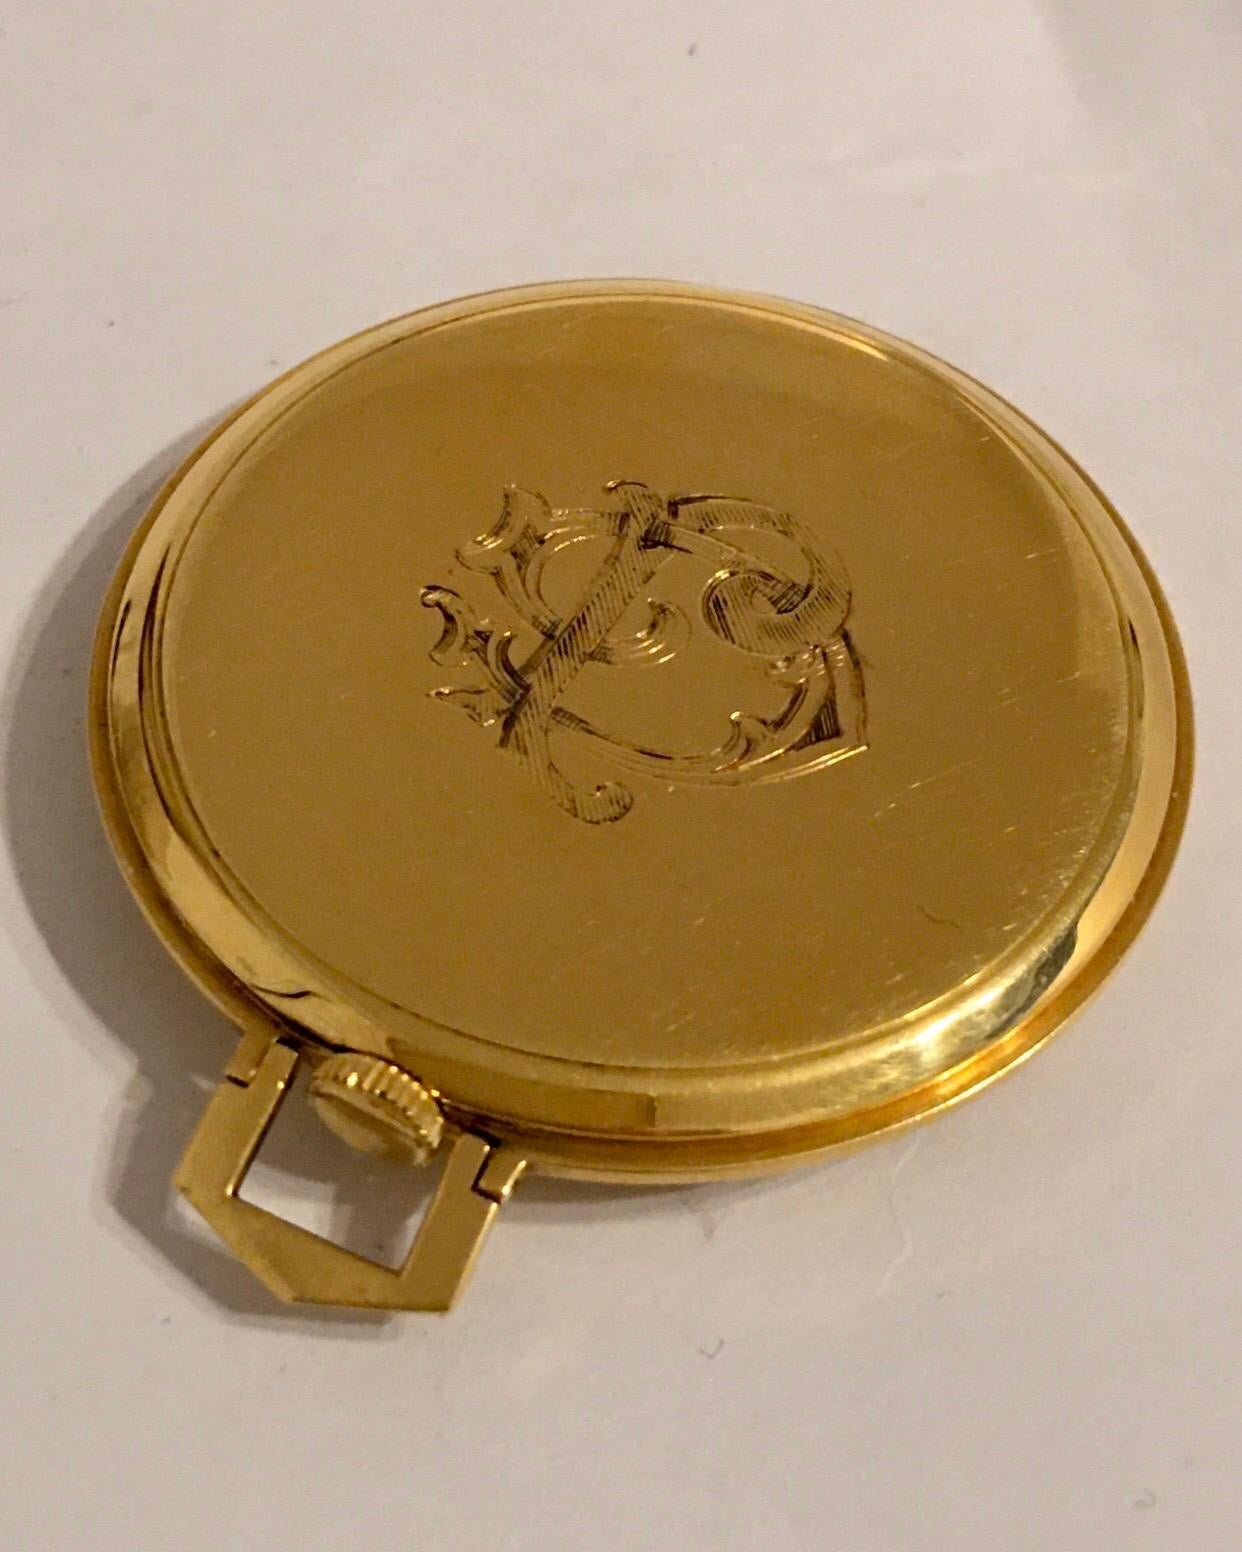 Rare 18k Gold Rolex Observatory Prince Imperial Dress Pocket Watch, circa 1950s For Sale 8